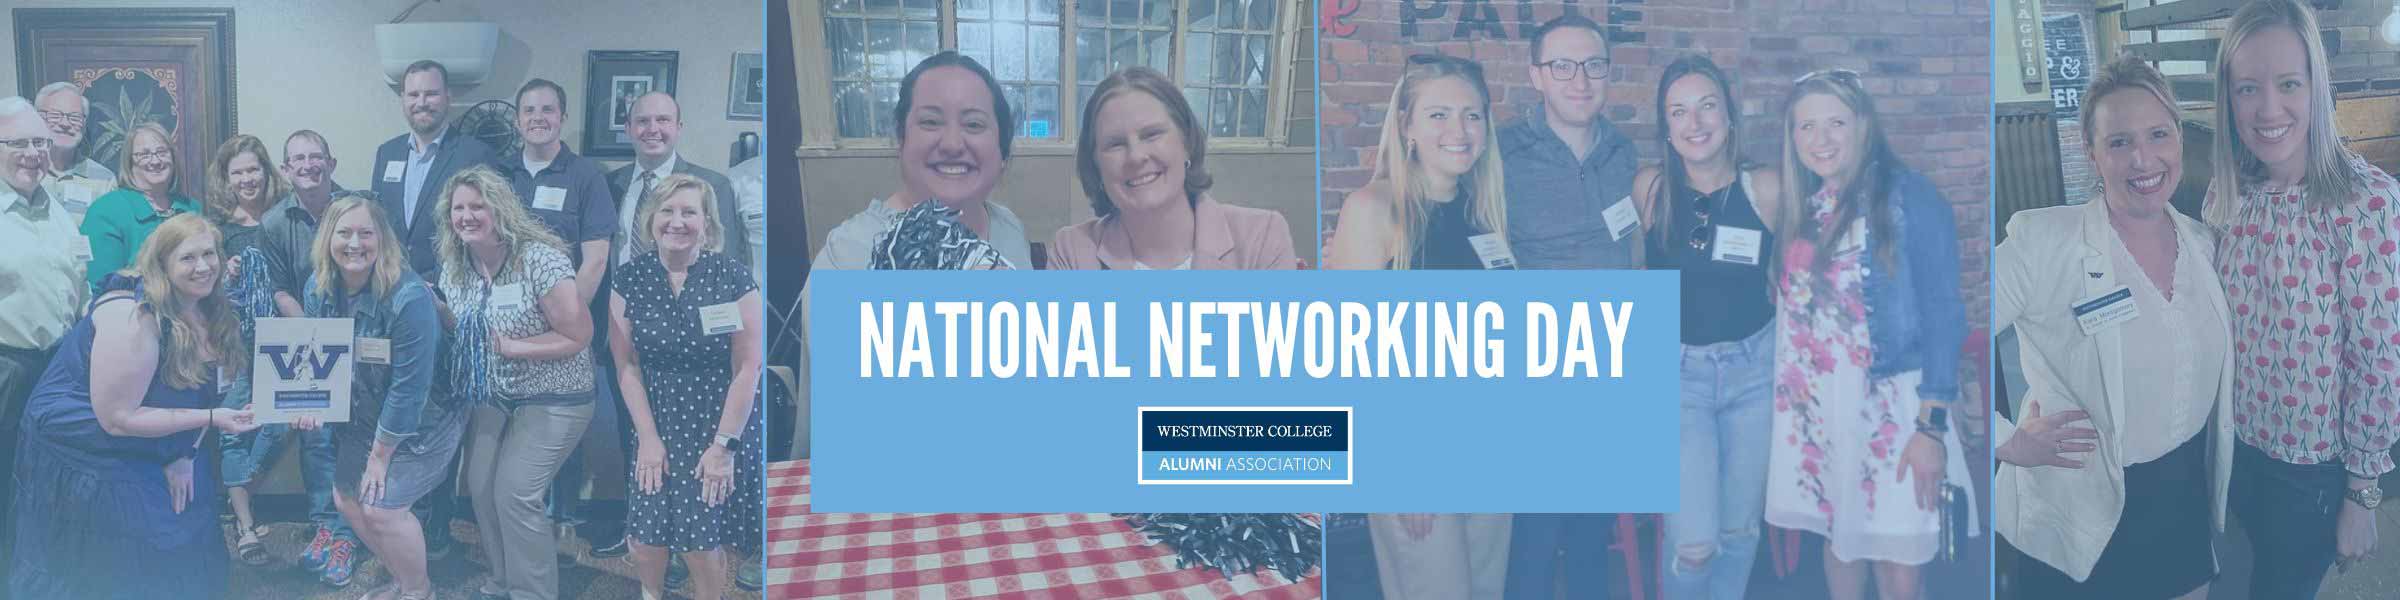 National Networking Day